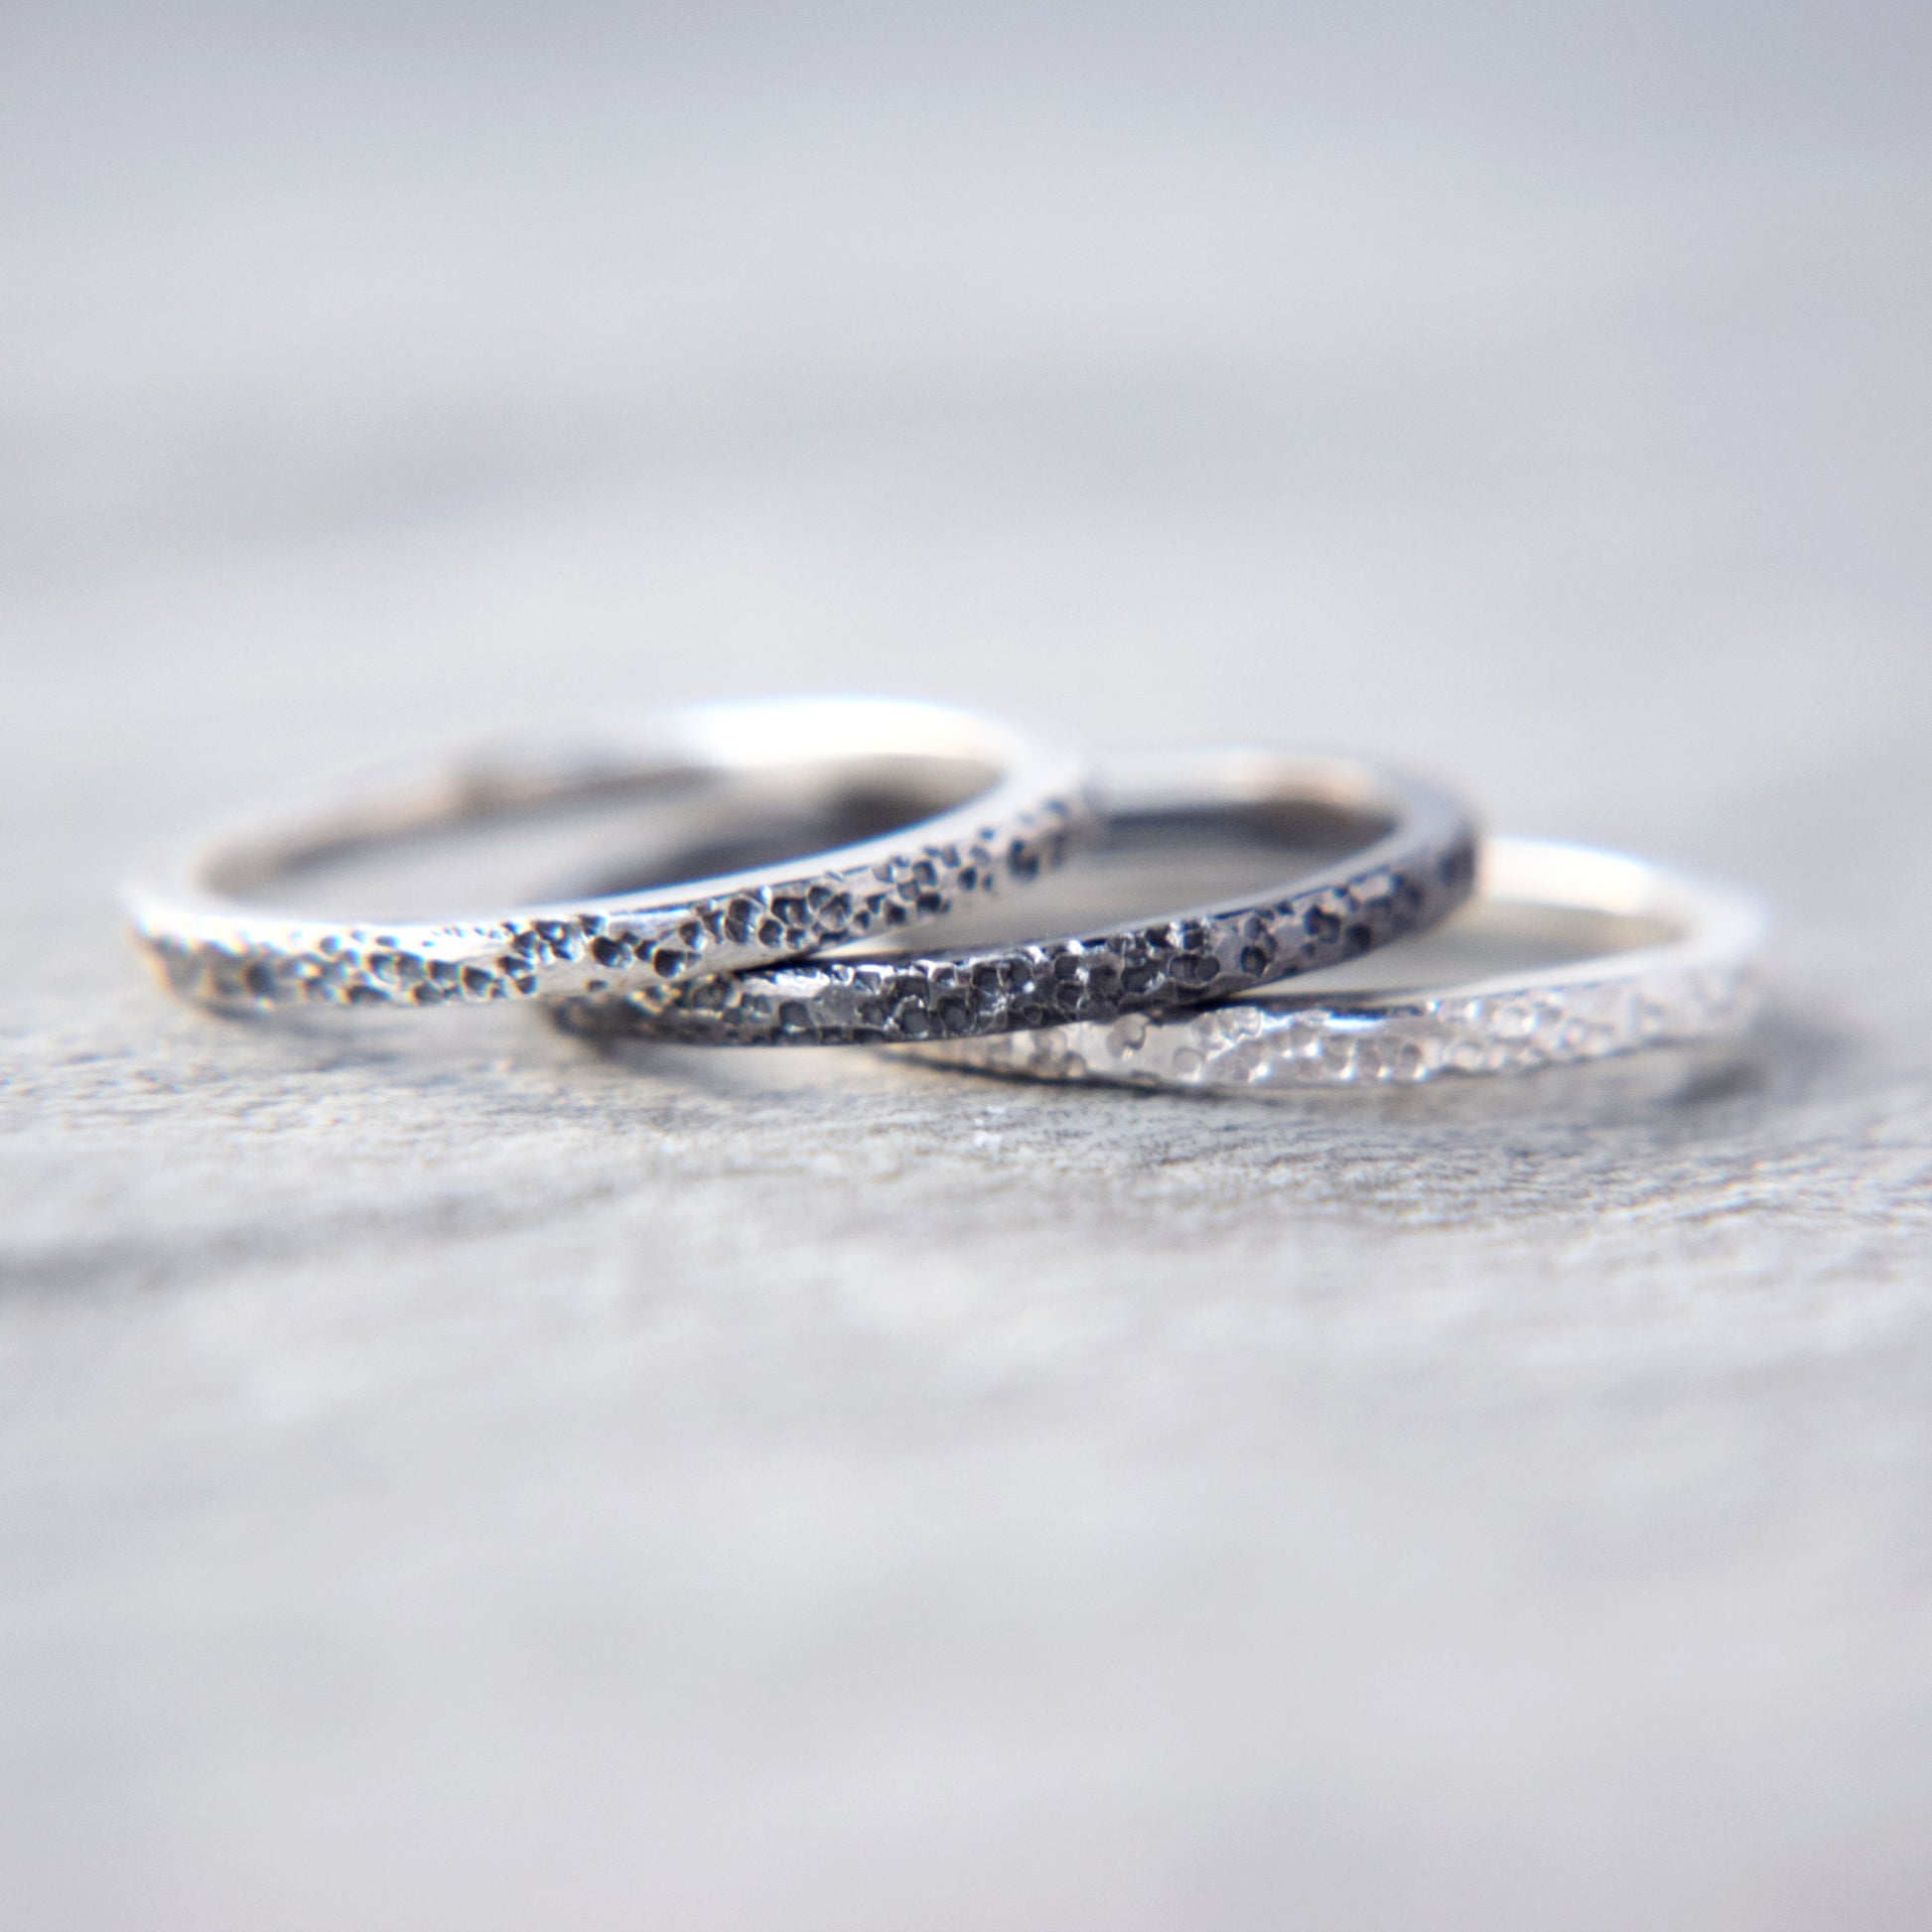 Half Oxidised Silver Lichen Stacking Ring - Paisley Pins